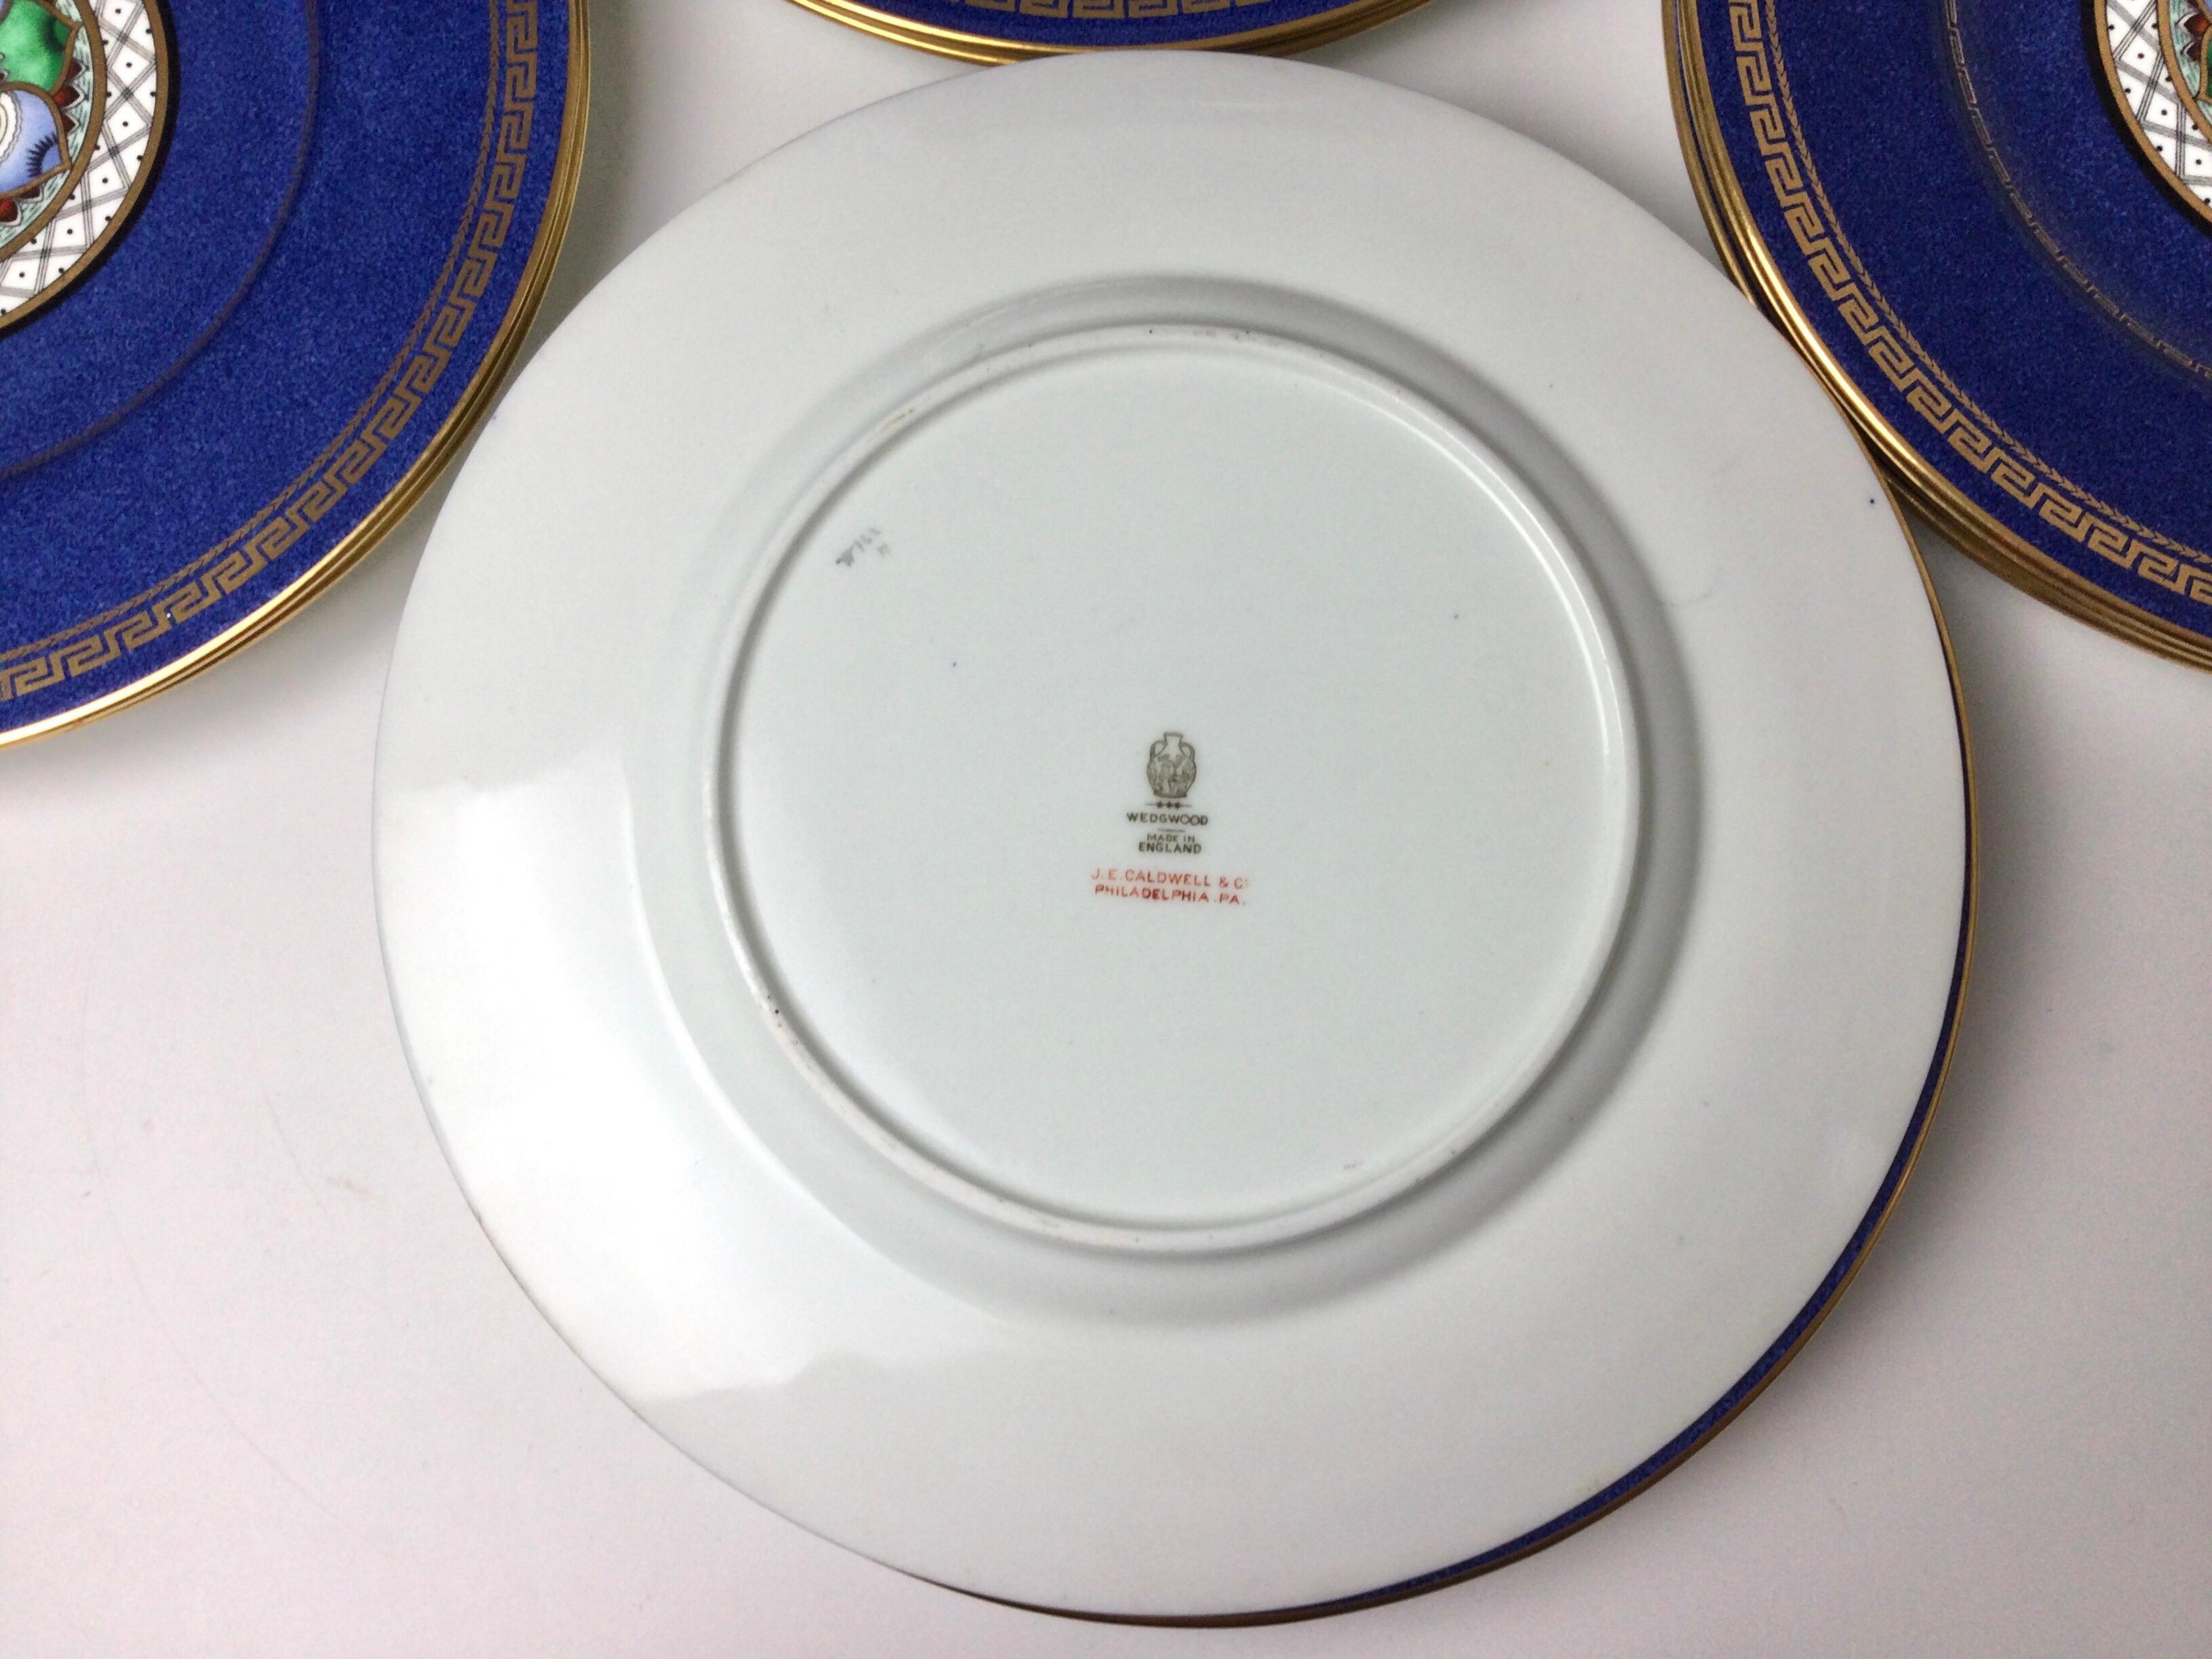 Wedgwood Blue Greek Key Floral Charger Plates Set of 12 In Excellent Condition For Sale In Lambertville, NJ